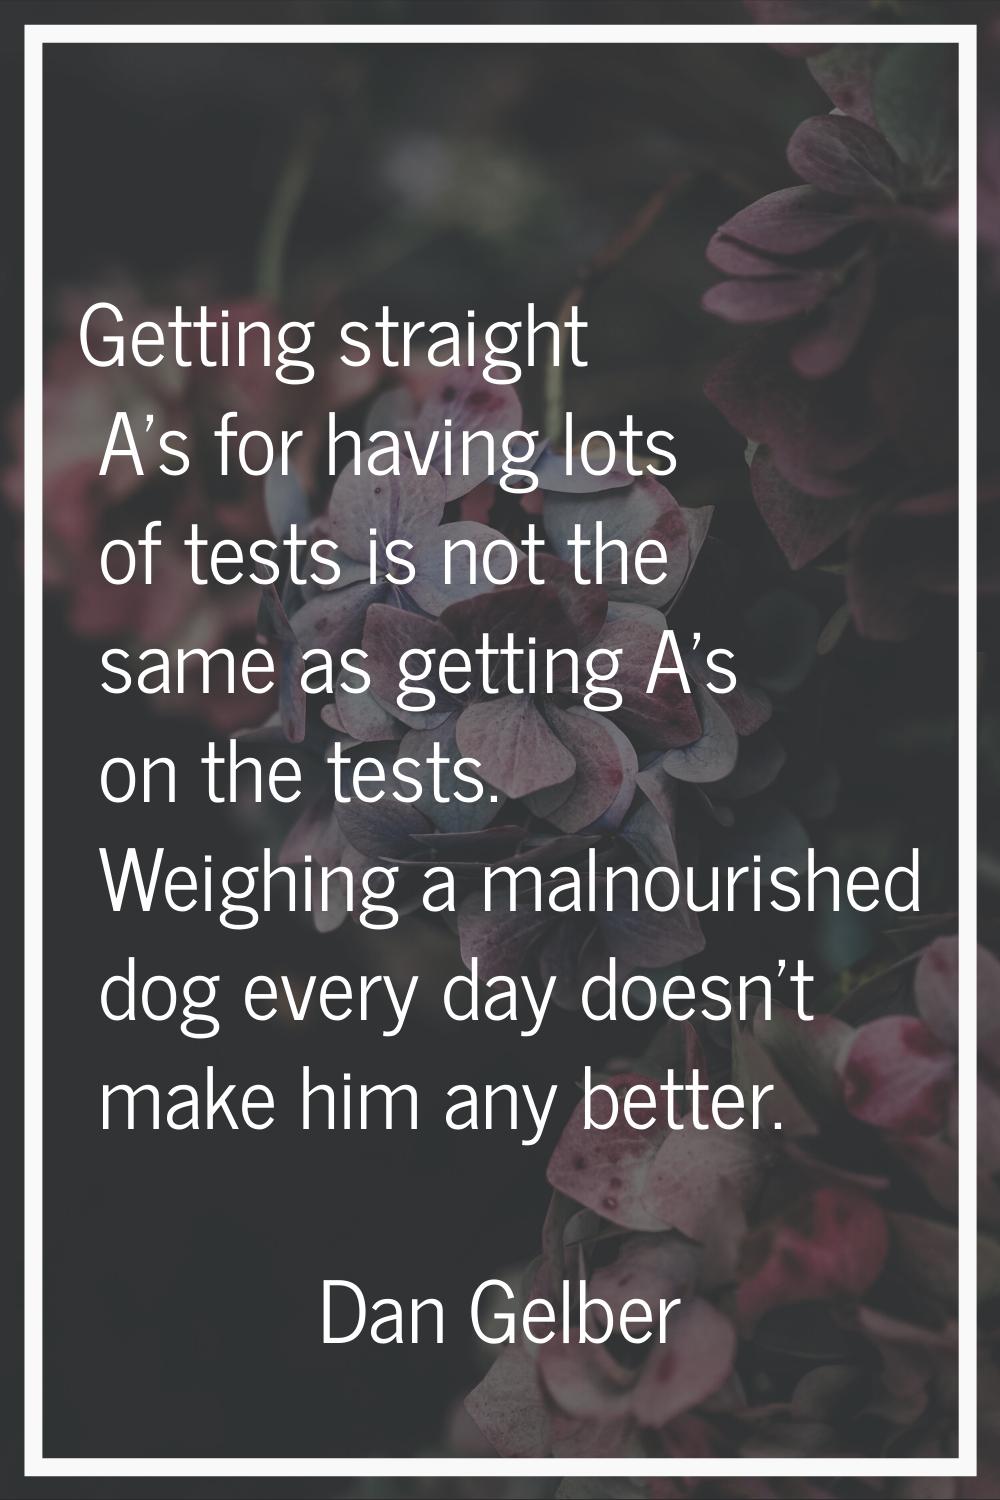 Getting straight A's for having lots of tests is not the same as getting A's on the tests. Weighing